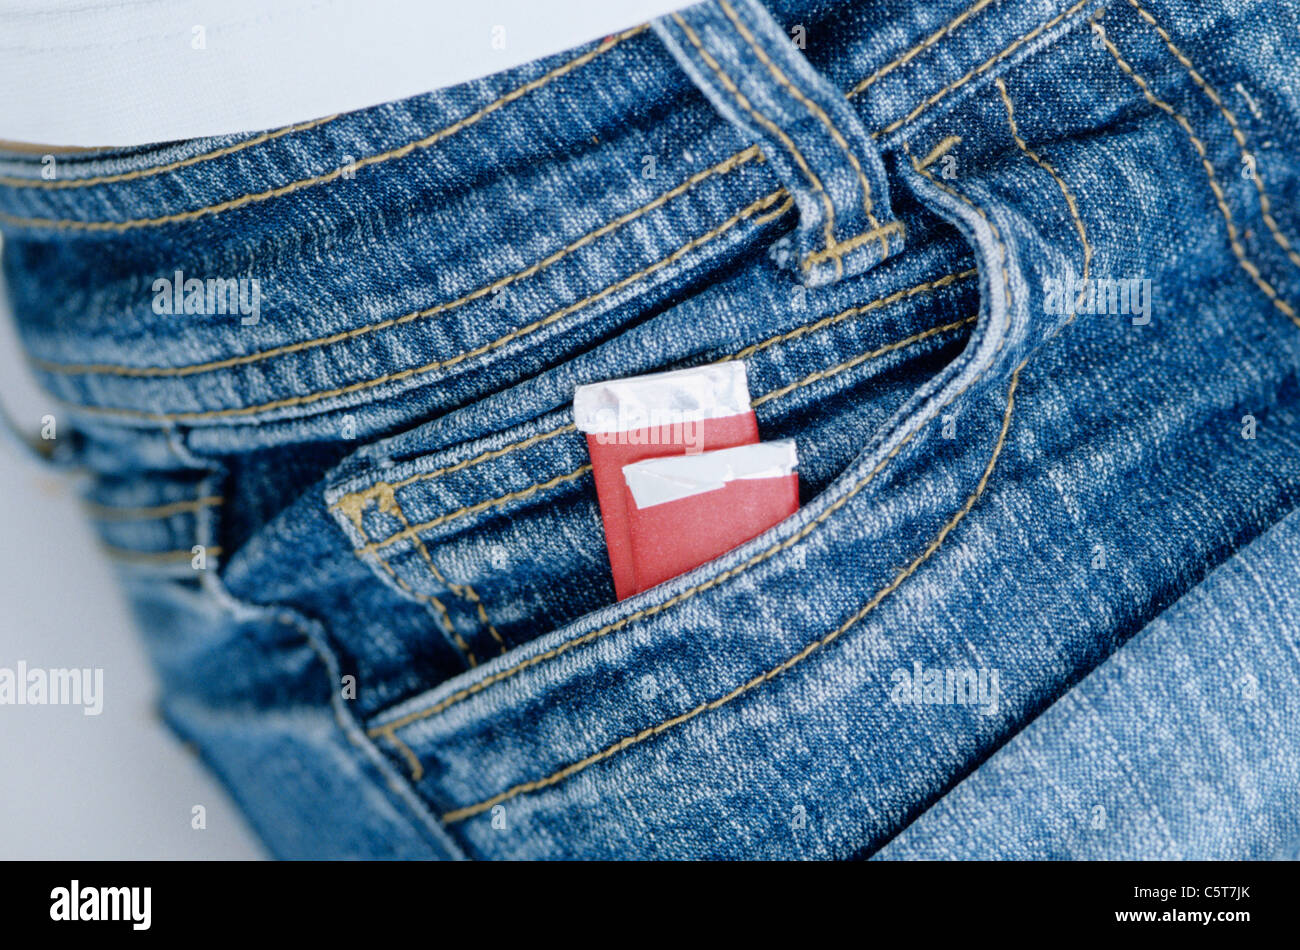 Bubble gum packets in jeans pocket Stock Photo